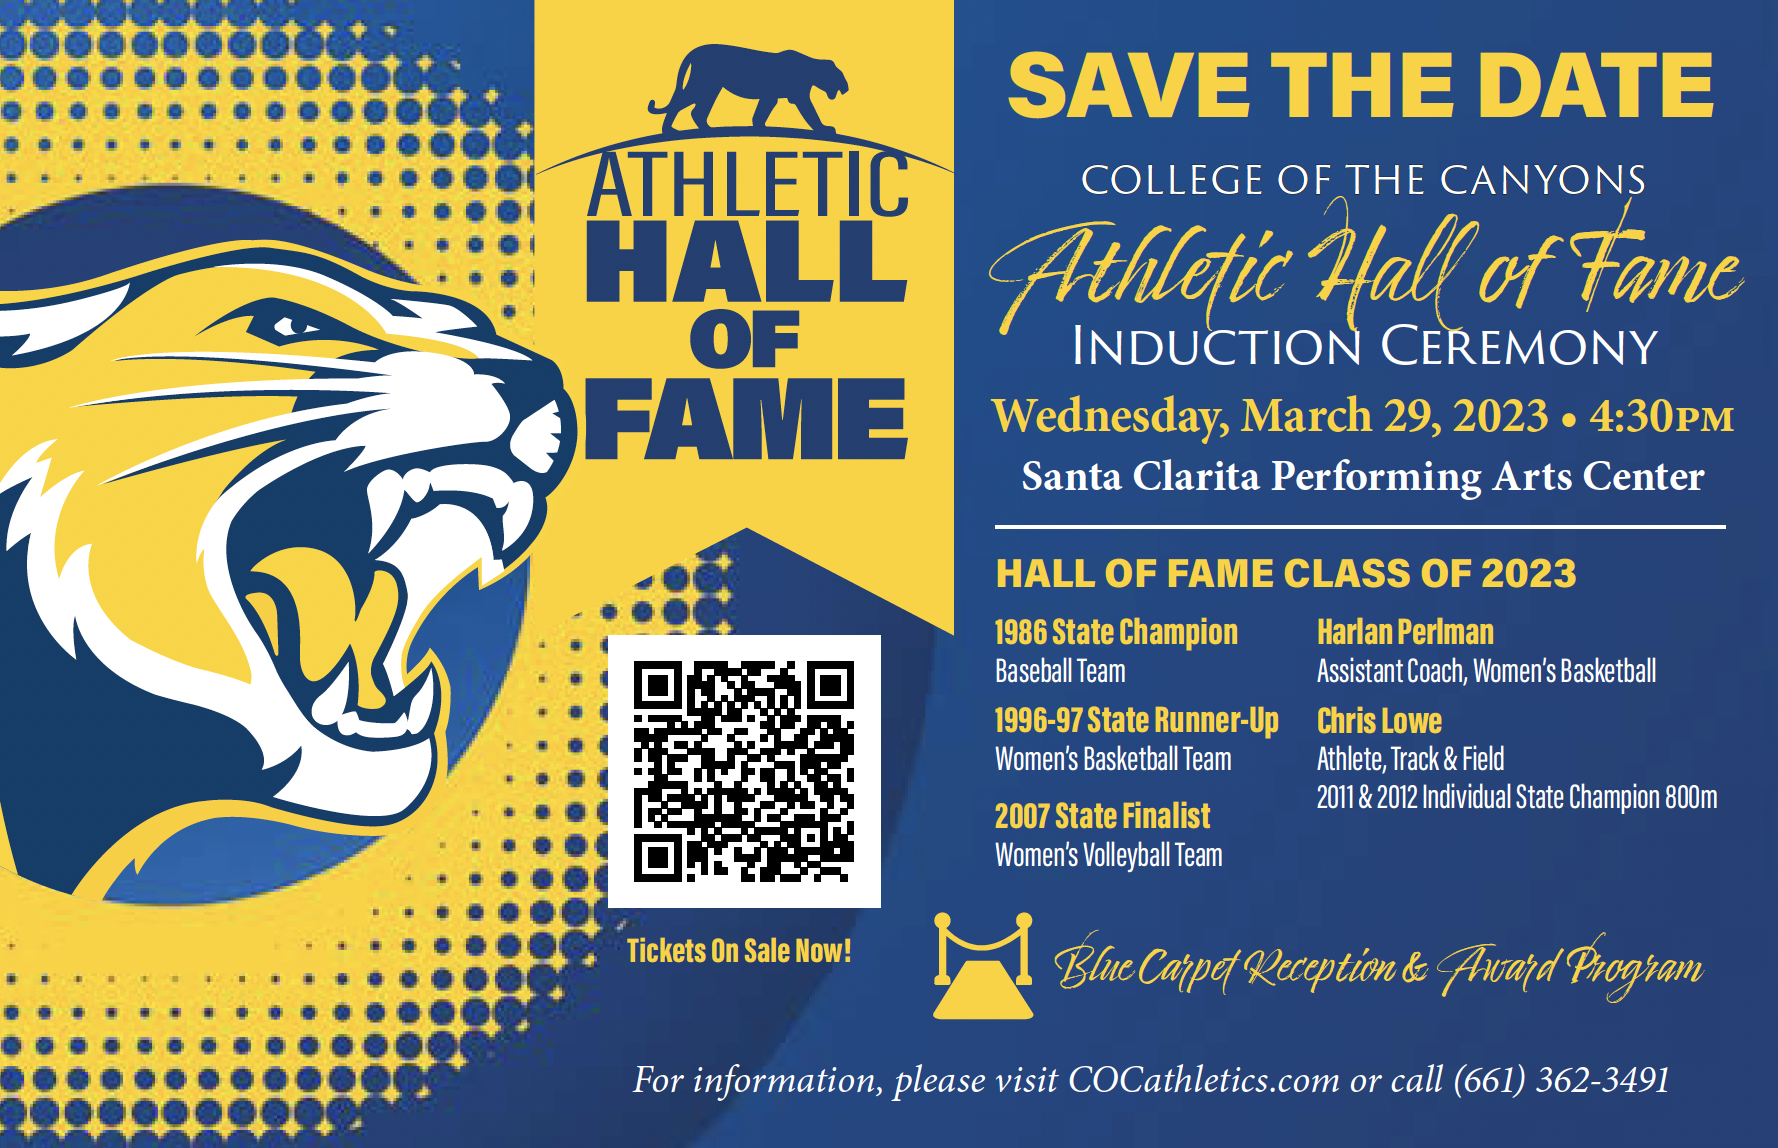 College of the Canyons Athletic Hall of Fame Save the Date Information graphic.